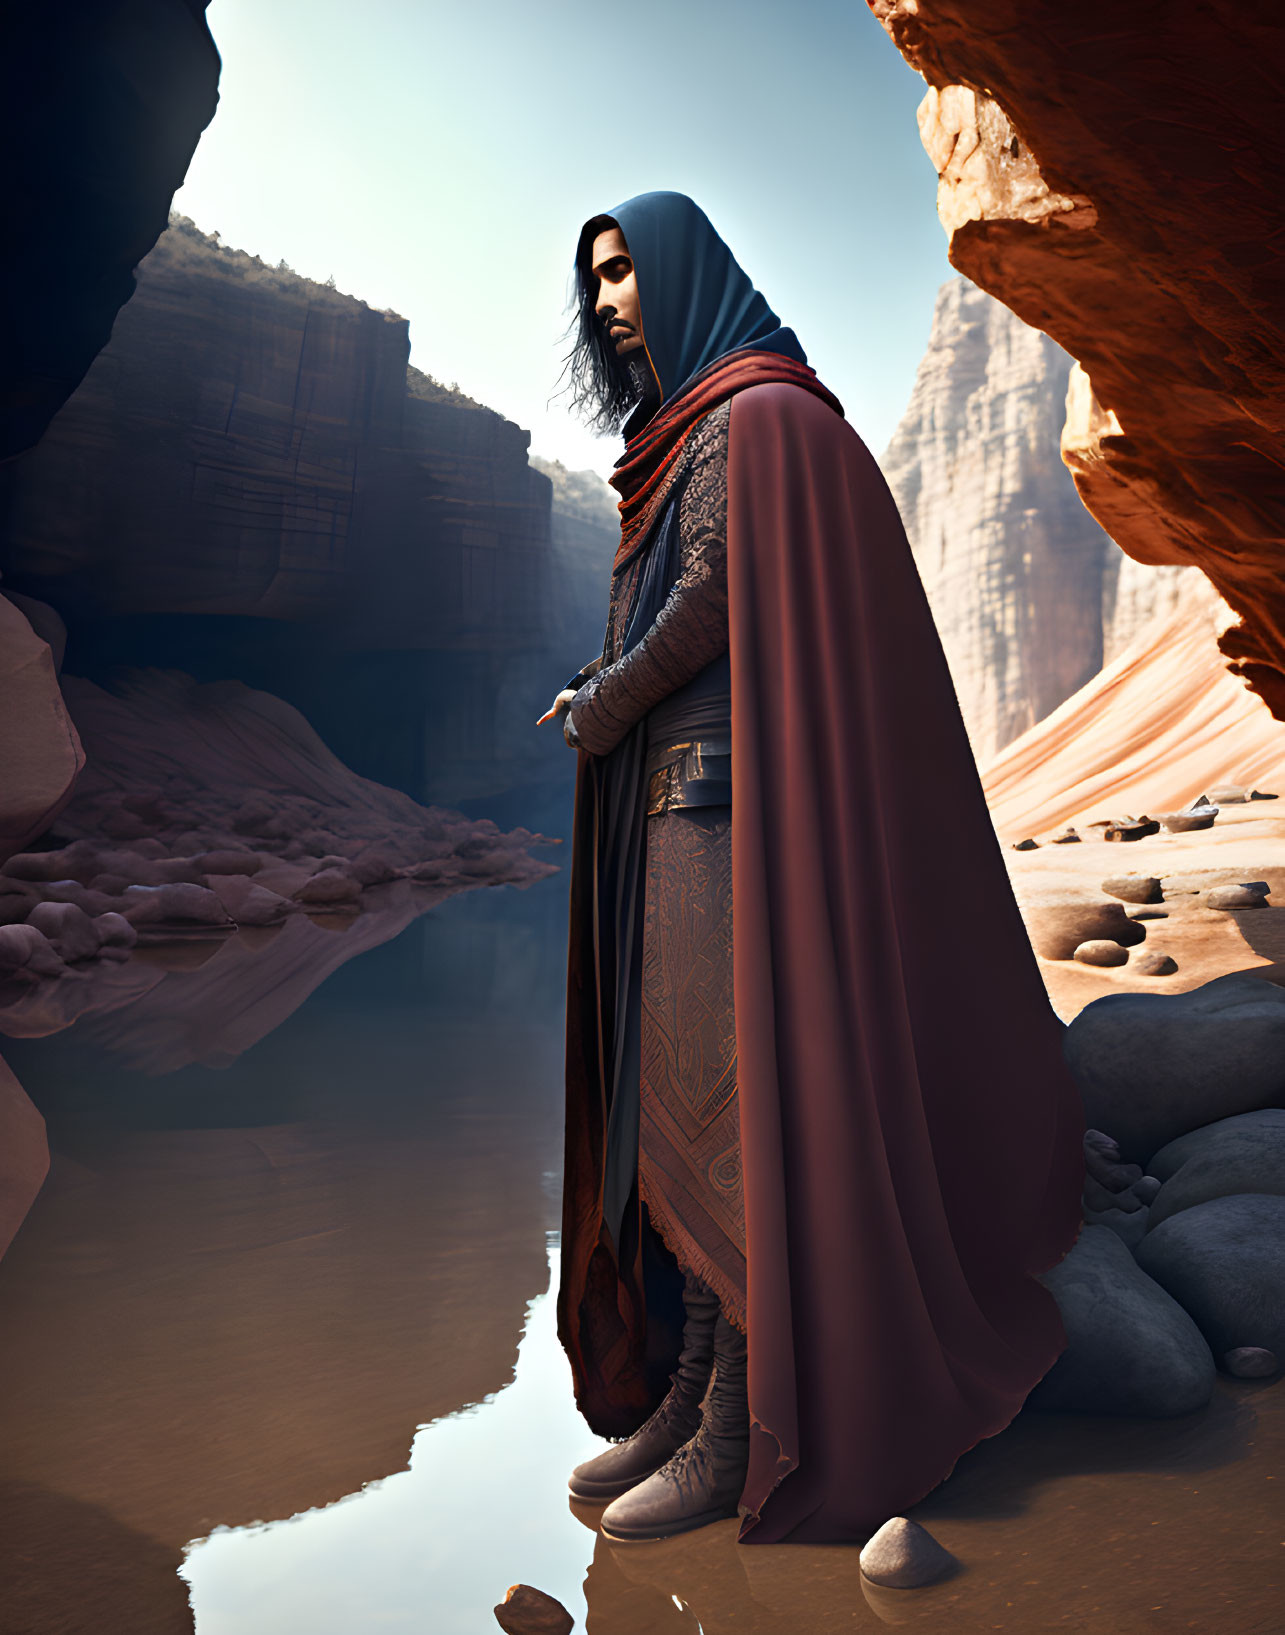 Cloaked figure in detailed armor and cape in sunlit canyon